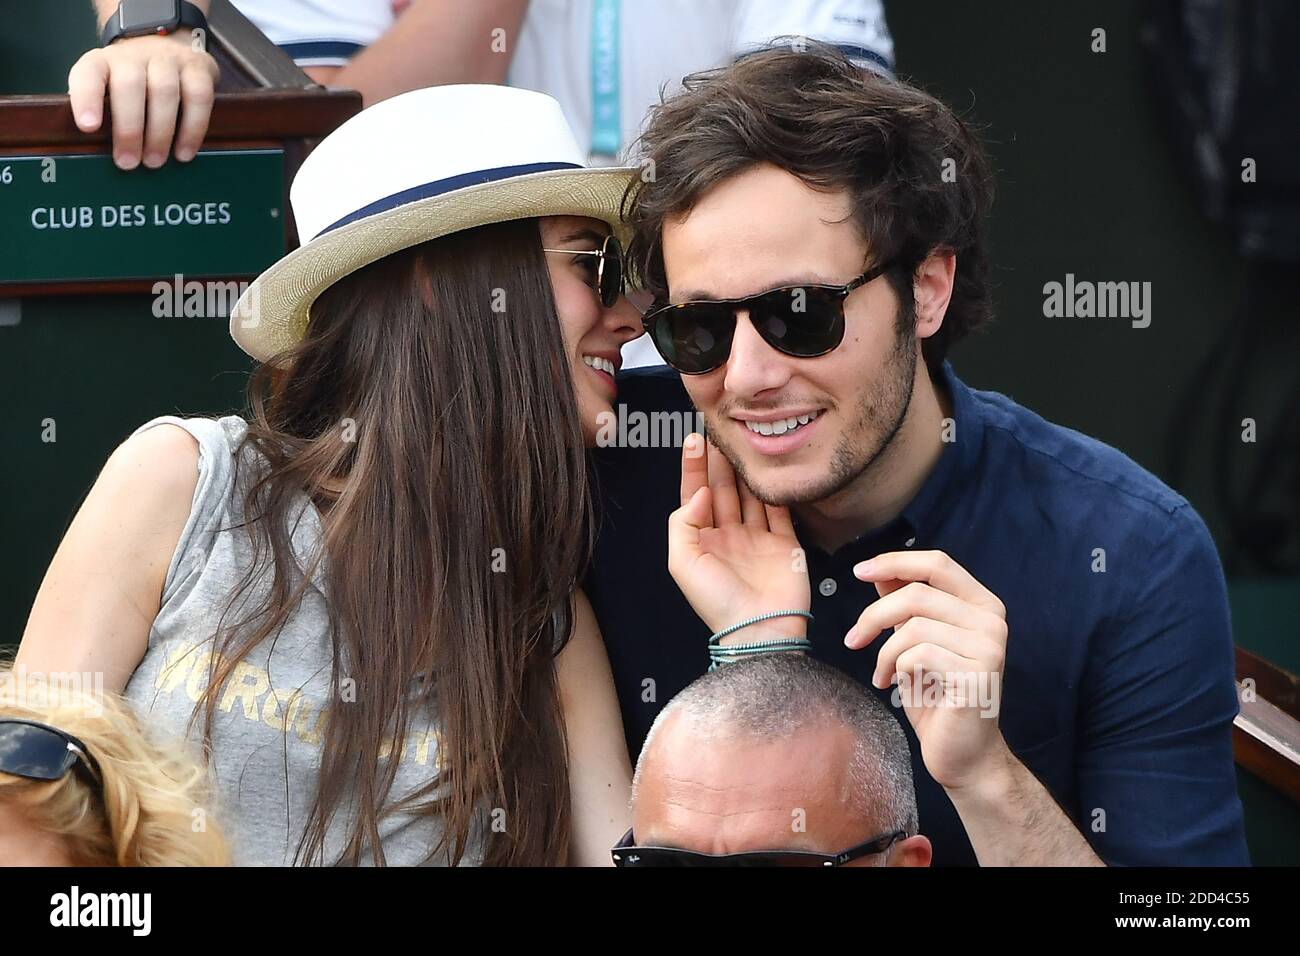 https://c8.alamy.com/comp/2DD4C55/singer-vianney-and-his-girlfriend-catherine-robert-attend-the-2018-french-open-day-seven-at-roland-garros-on-june-3-2018-in-paris-france-photo-by-laurent-zabulonabacapresscom-2DD4C55.jpg